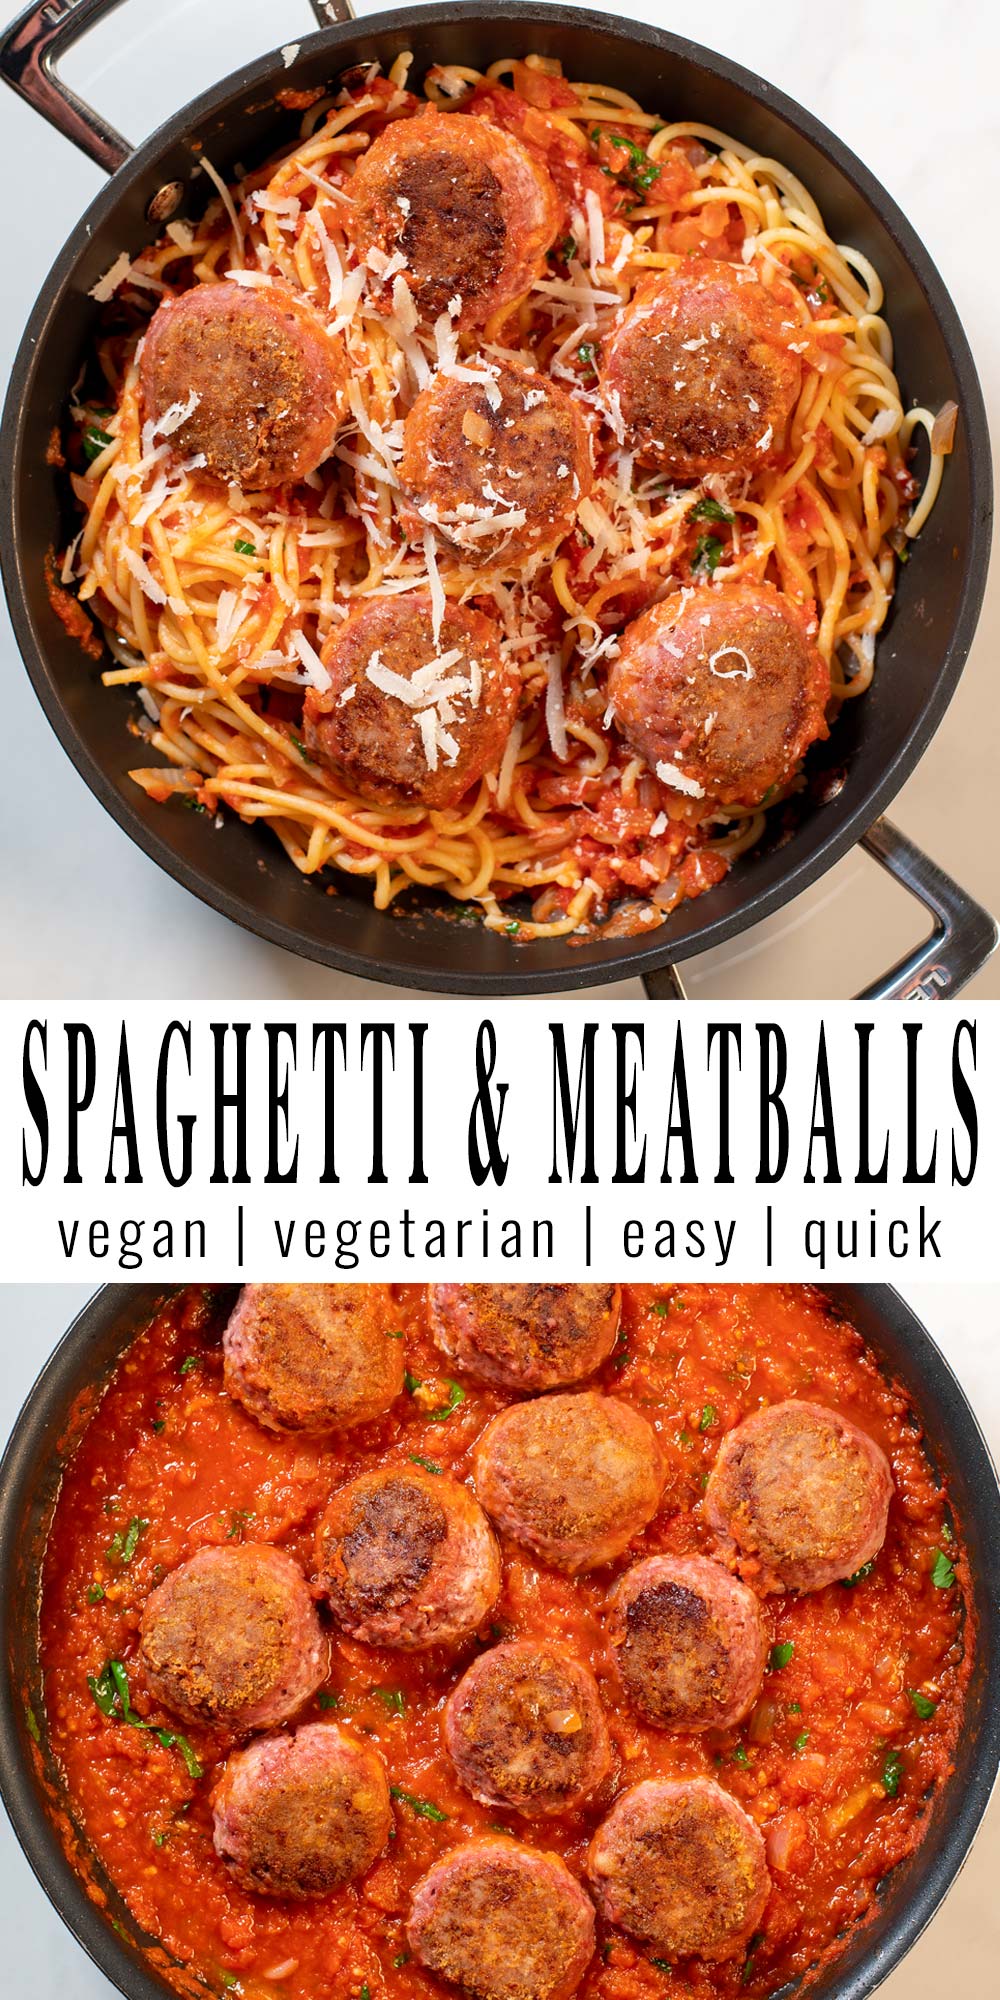 Collage of two photos of Spaghetti and Meatballs with recipe title text.